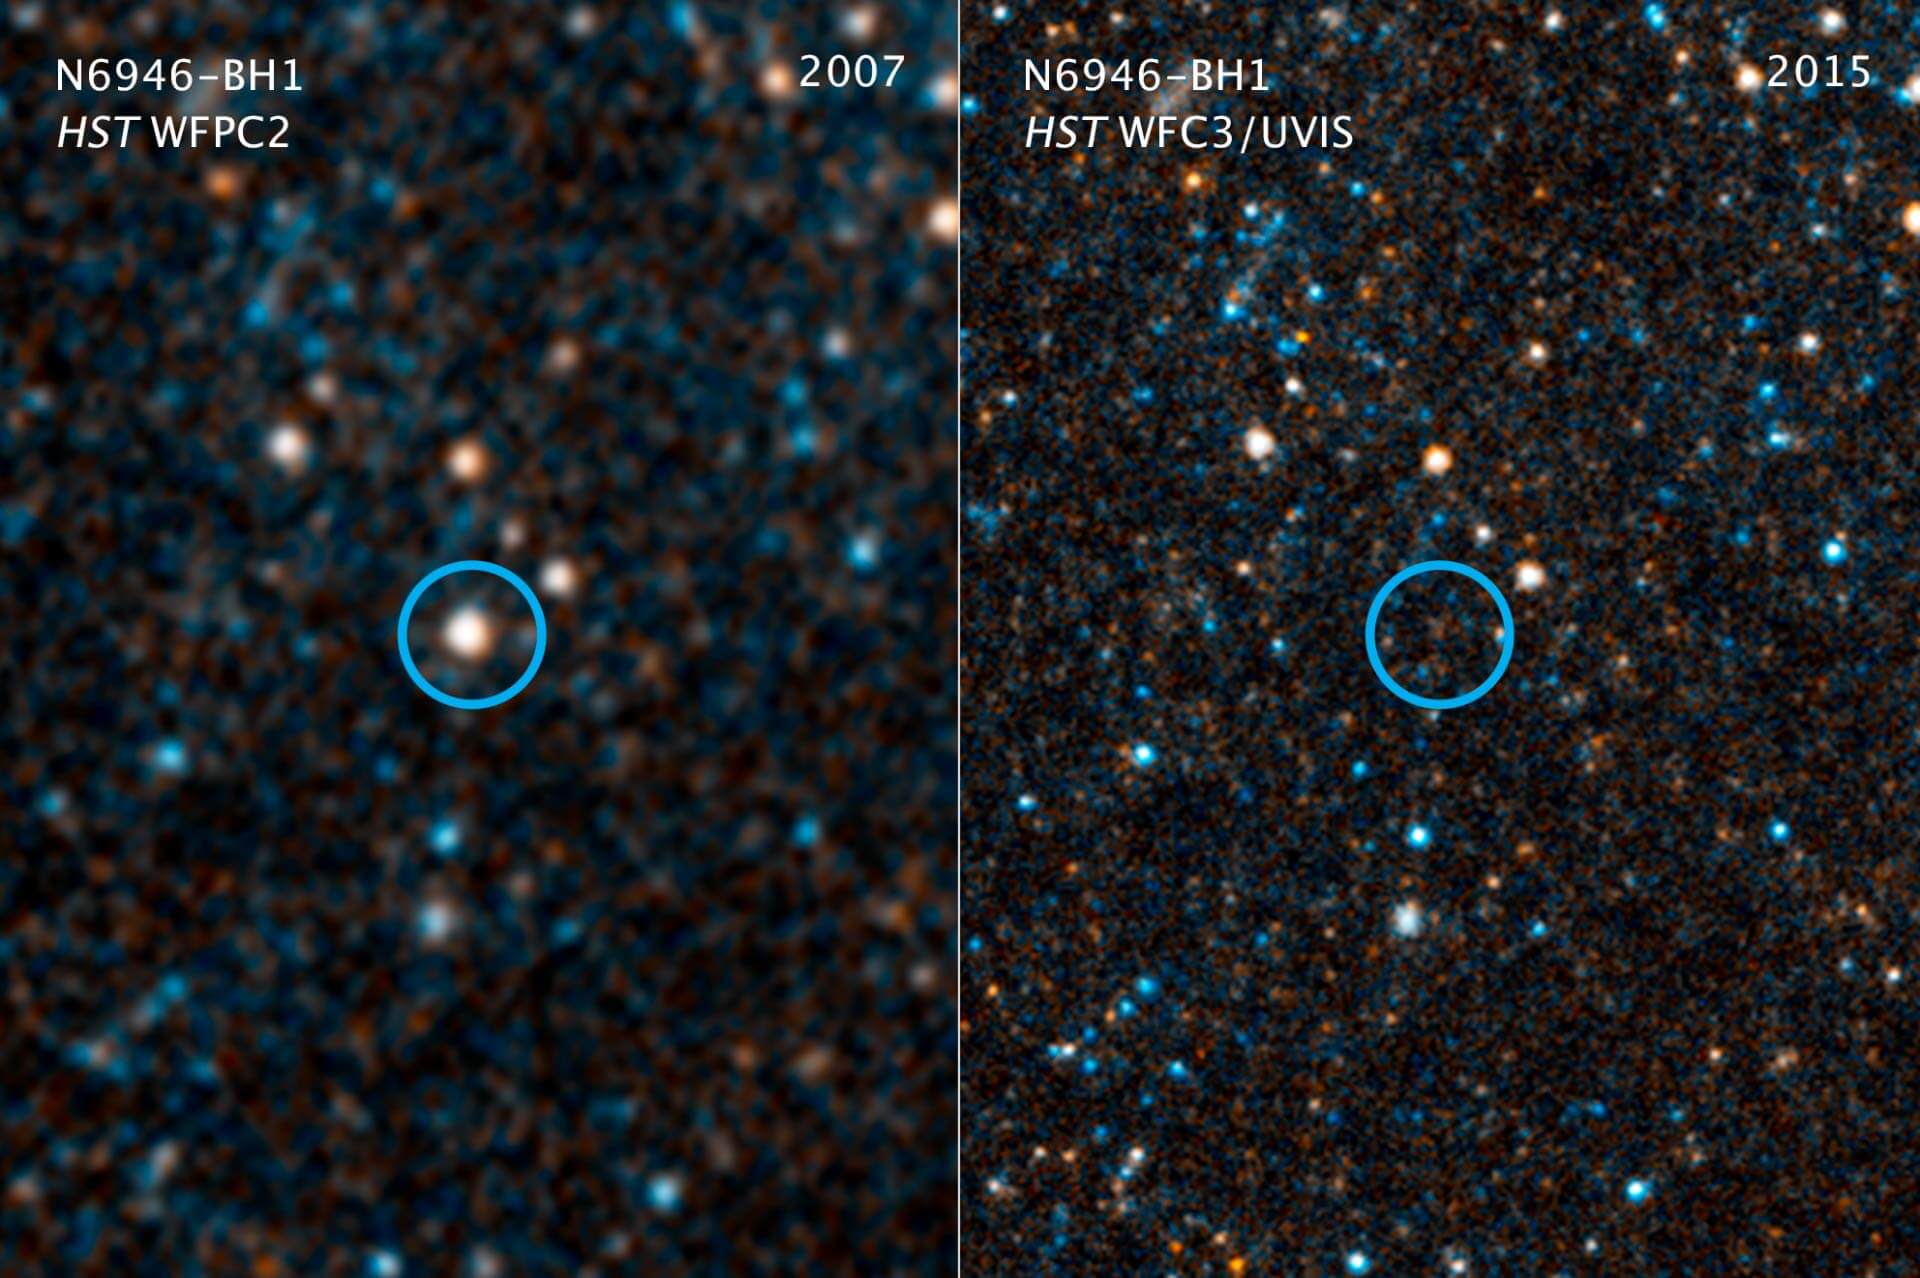 The star collapses into a black hole right in front of the Hubble lens